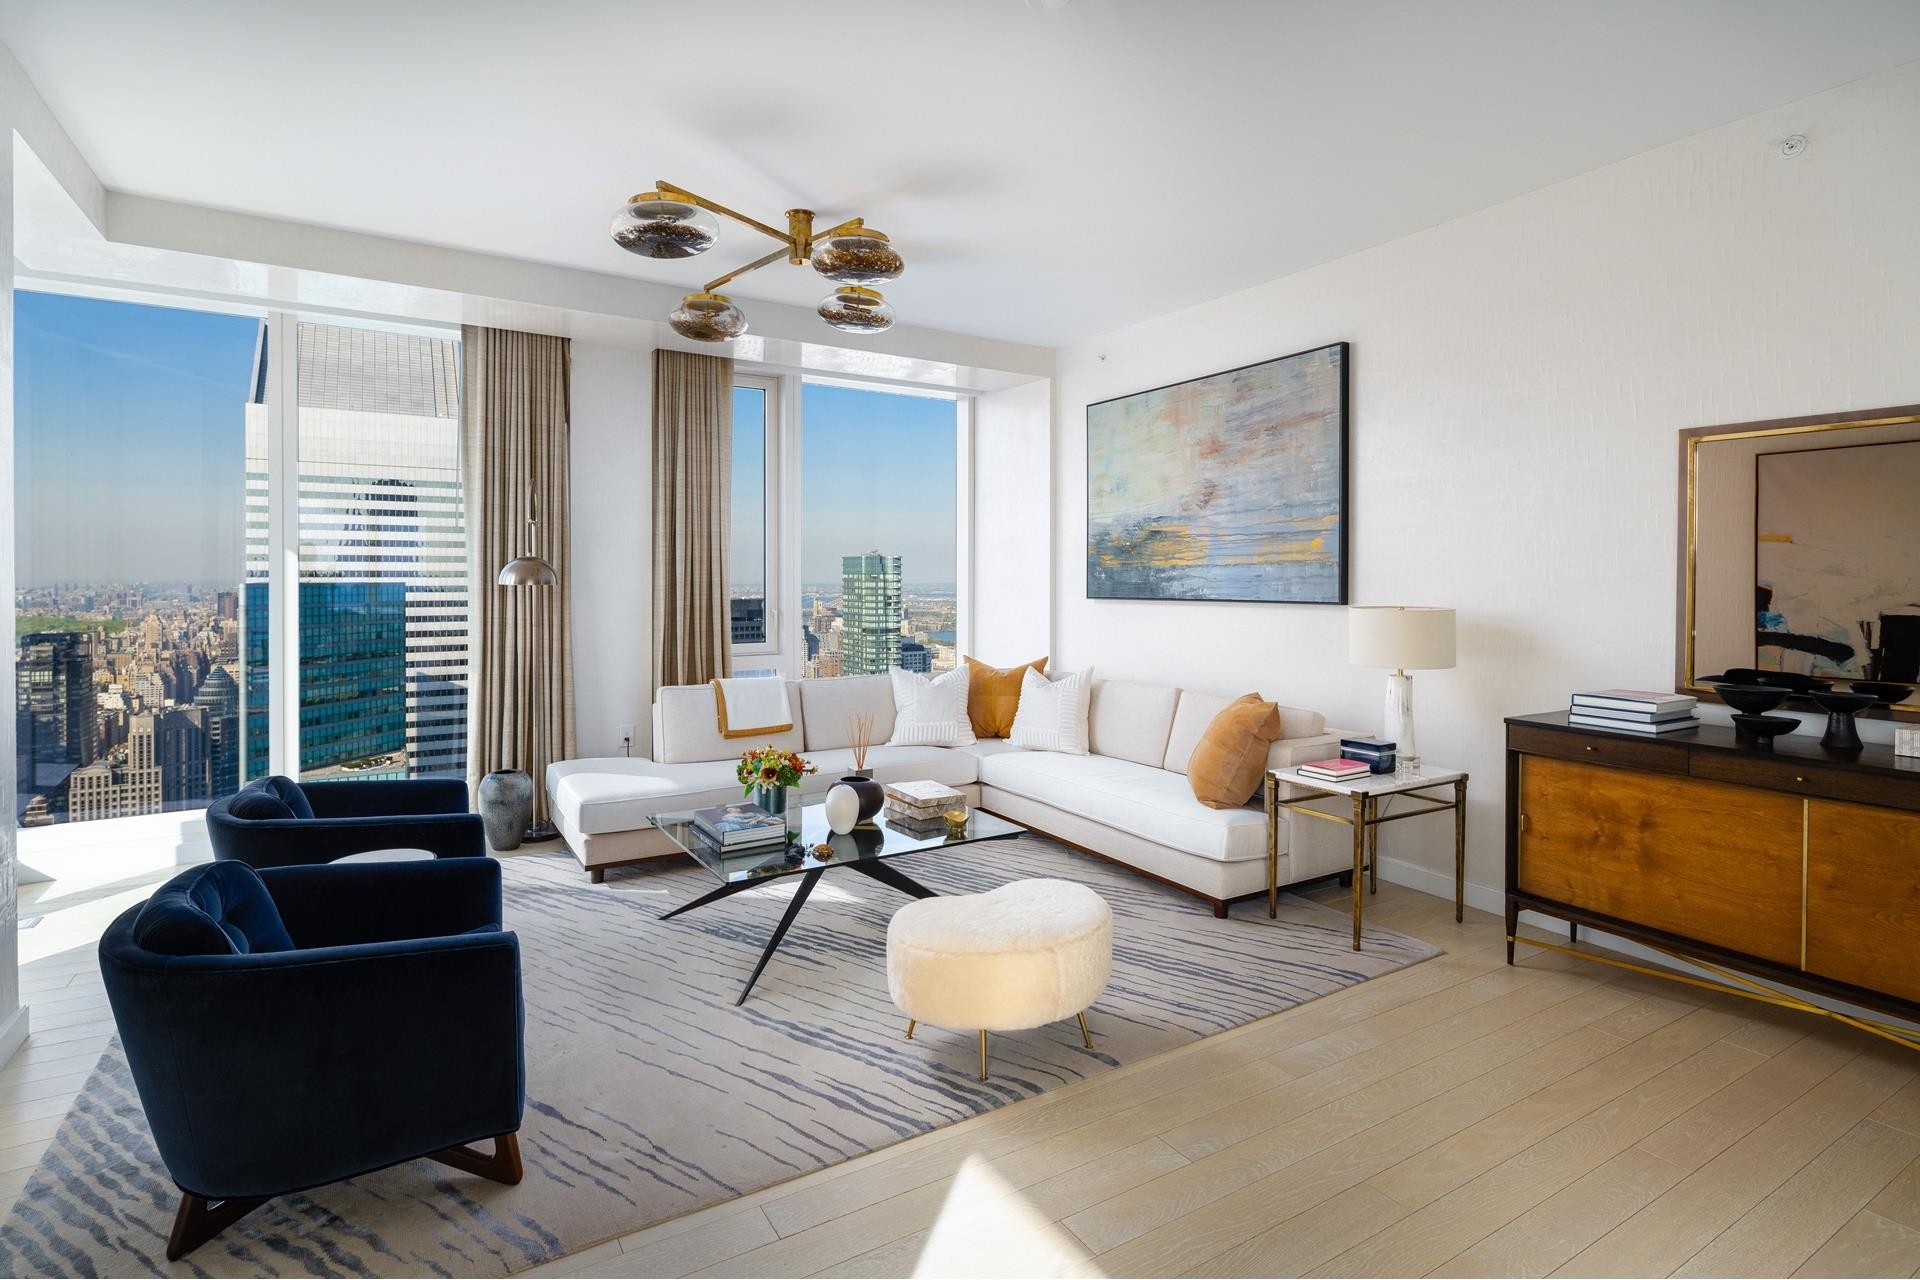 Property at The Centrale Condo, 138 E 50TH ST, 65 Turtle Bay, New York, New York 10022